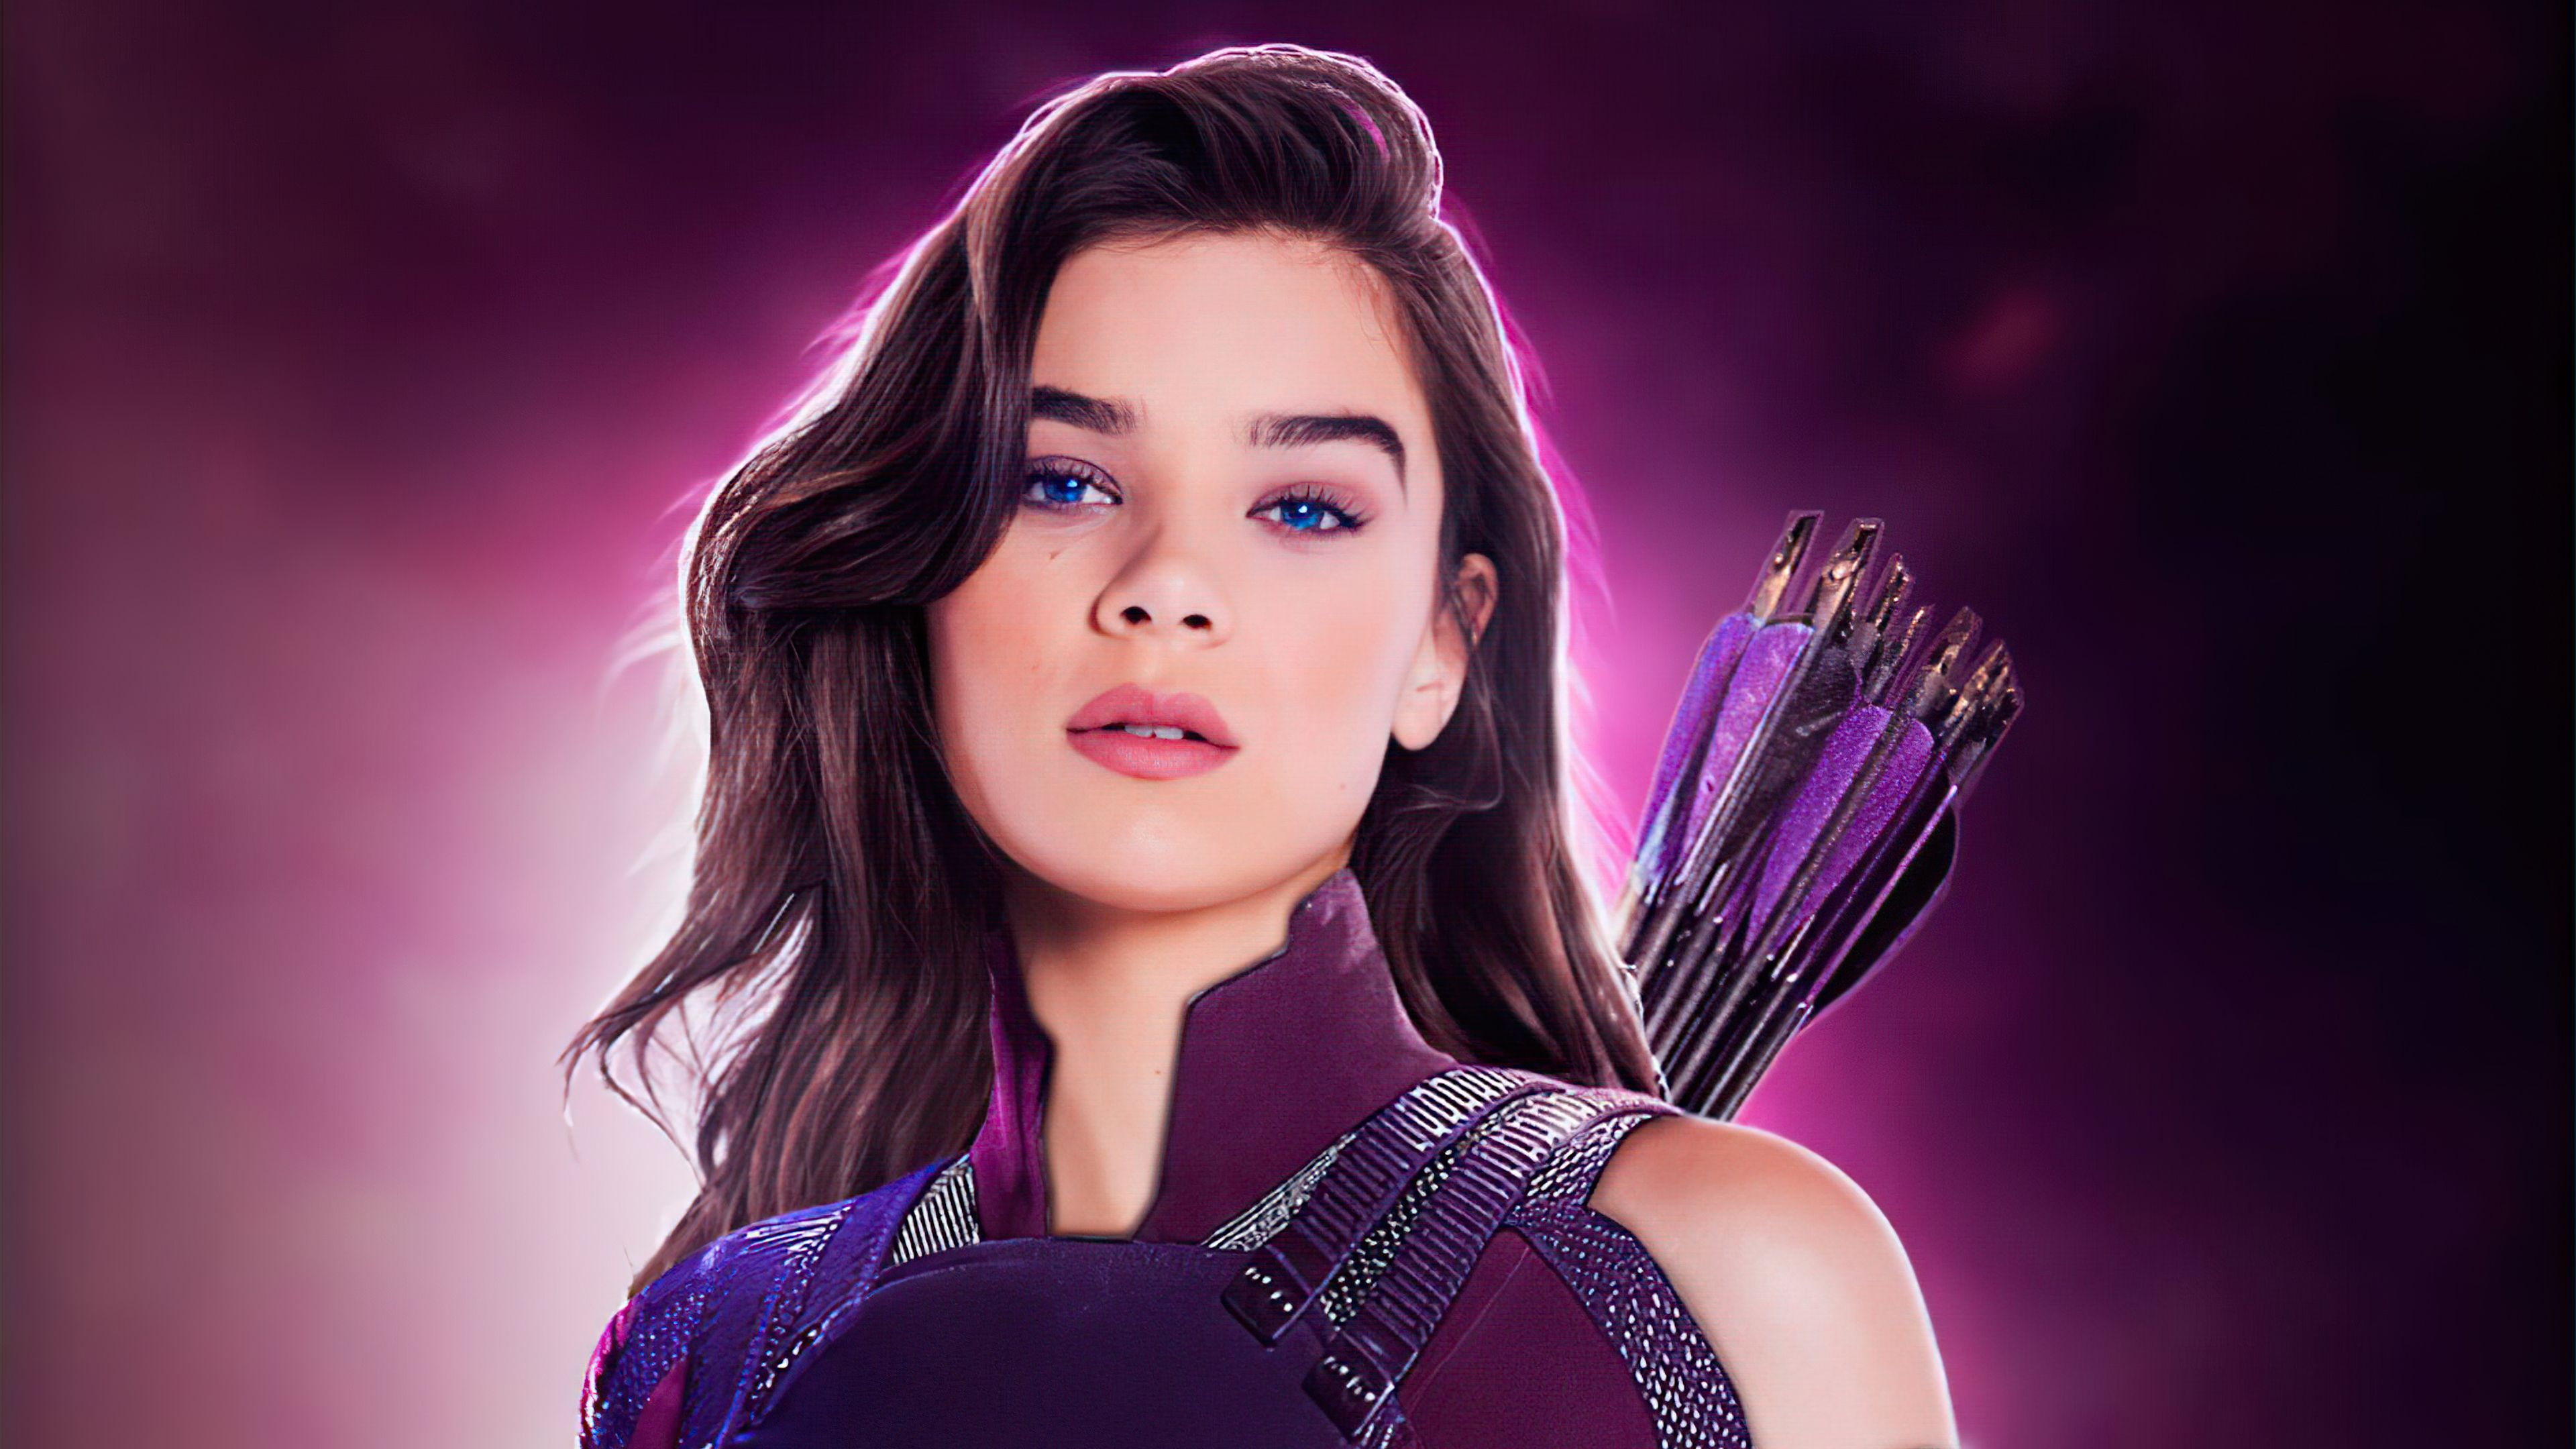 Hailee Steinfeld S Return As Marvel S Kate Bishop Teased For Phase 5 By